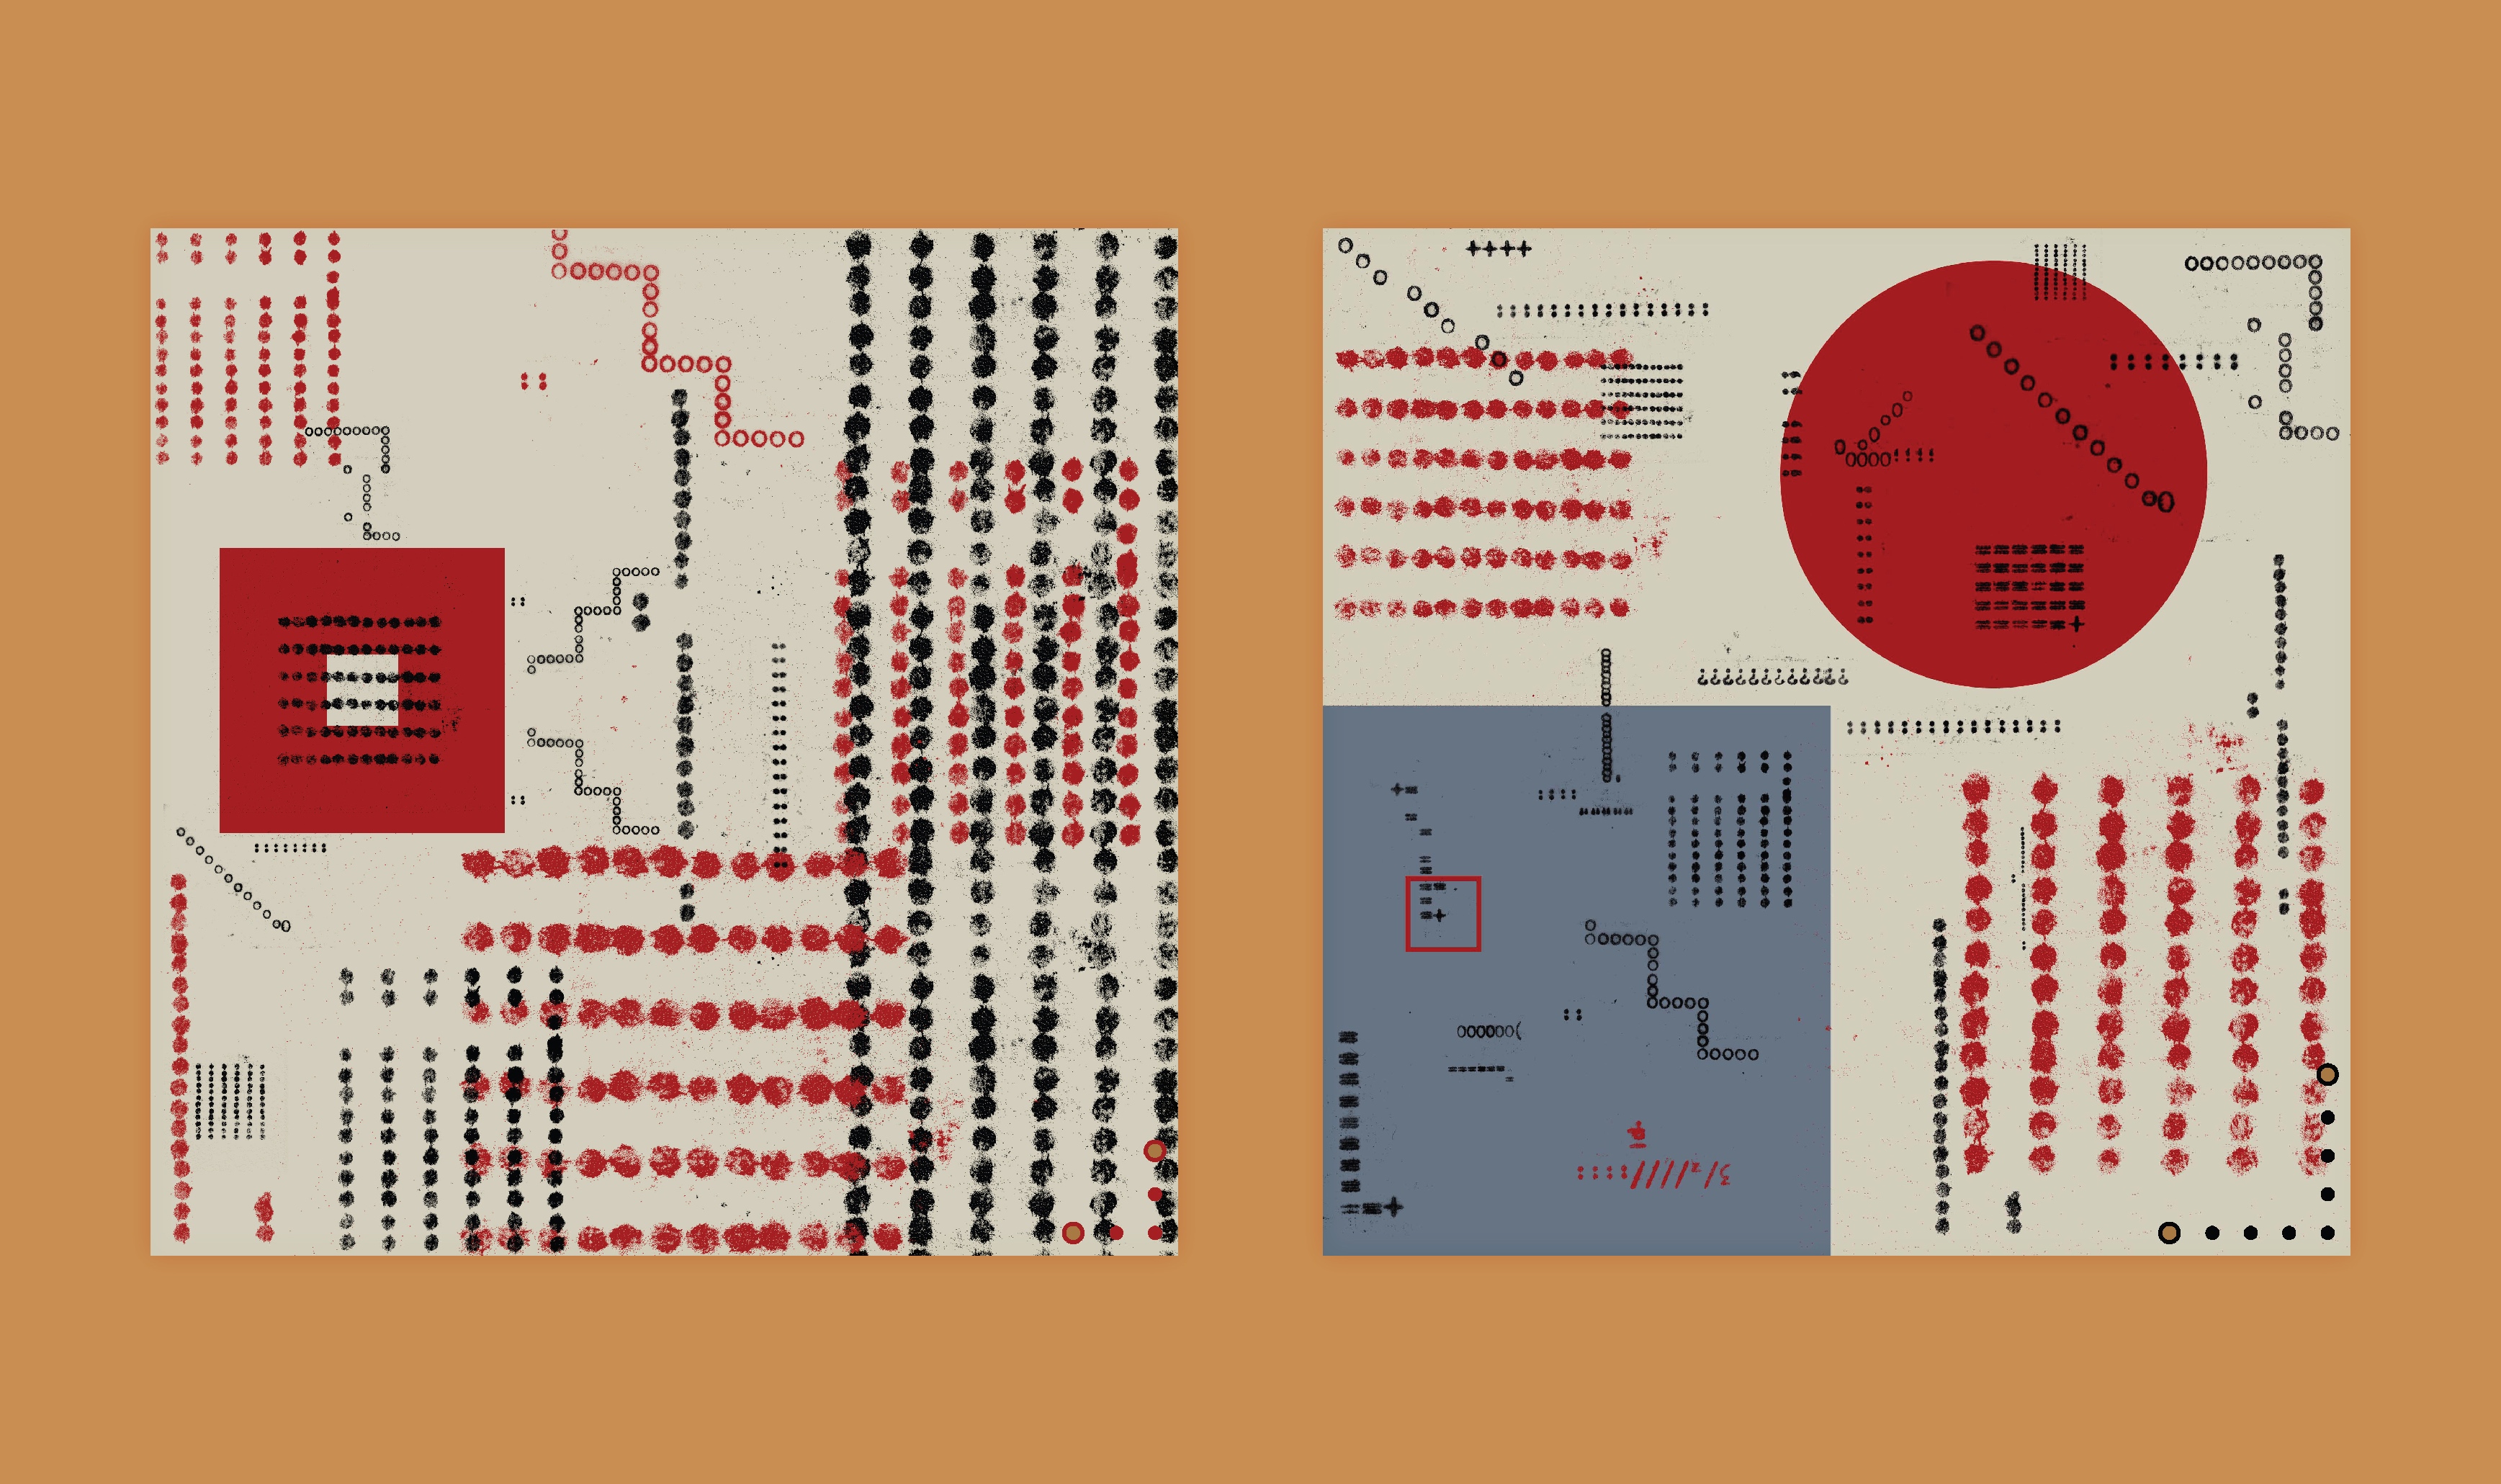 BA Design for Publishing work by Rebecca Hills, showing formulaic pattern designs using punctuation markings and the muted pigments of a typewriter.